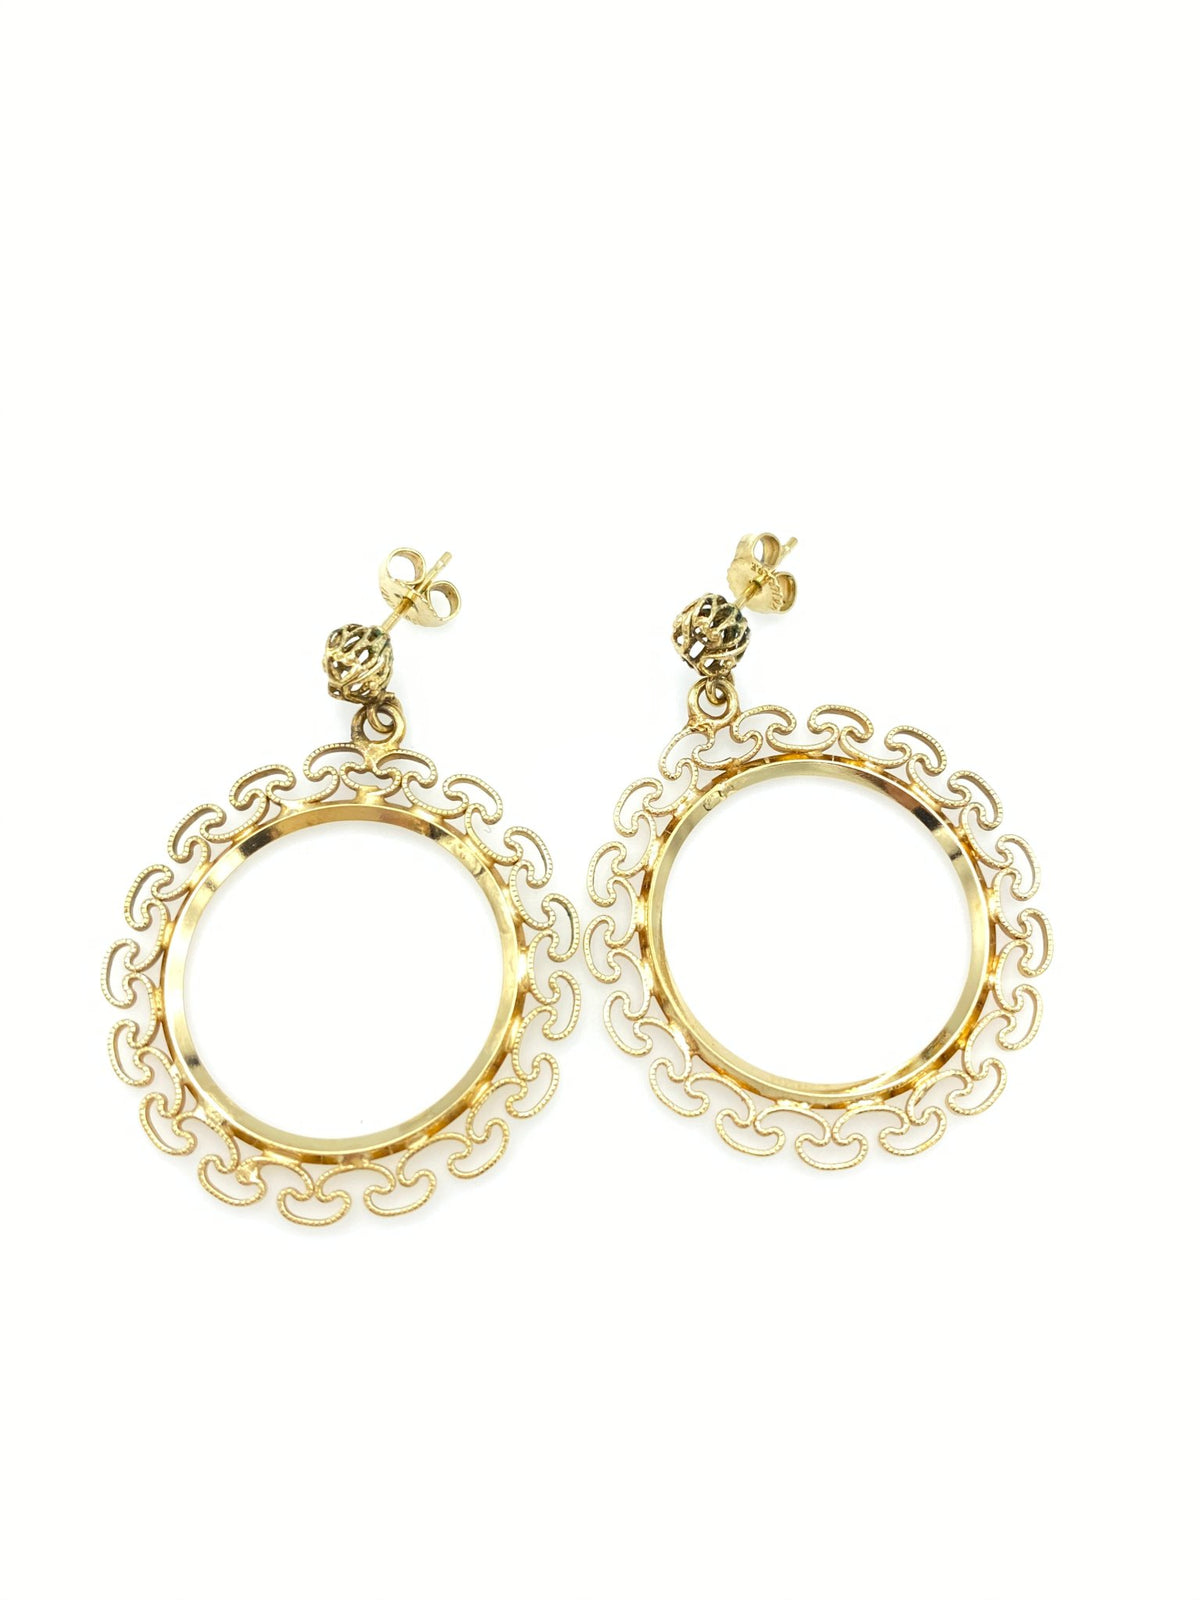 Gold Filled Filigree Circle Dangle Pierced Earrings - 24 Wishes Vintage Jewelry